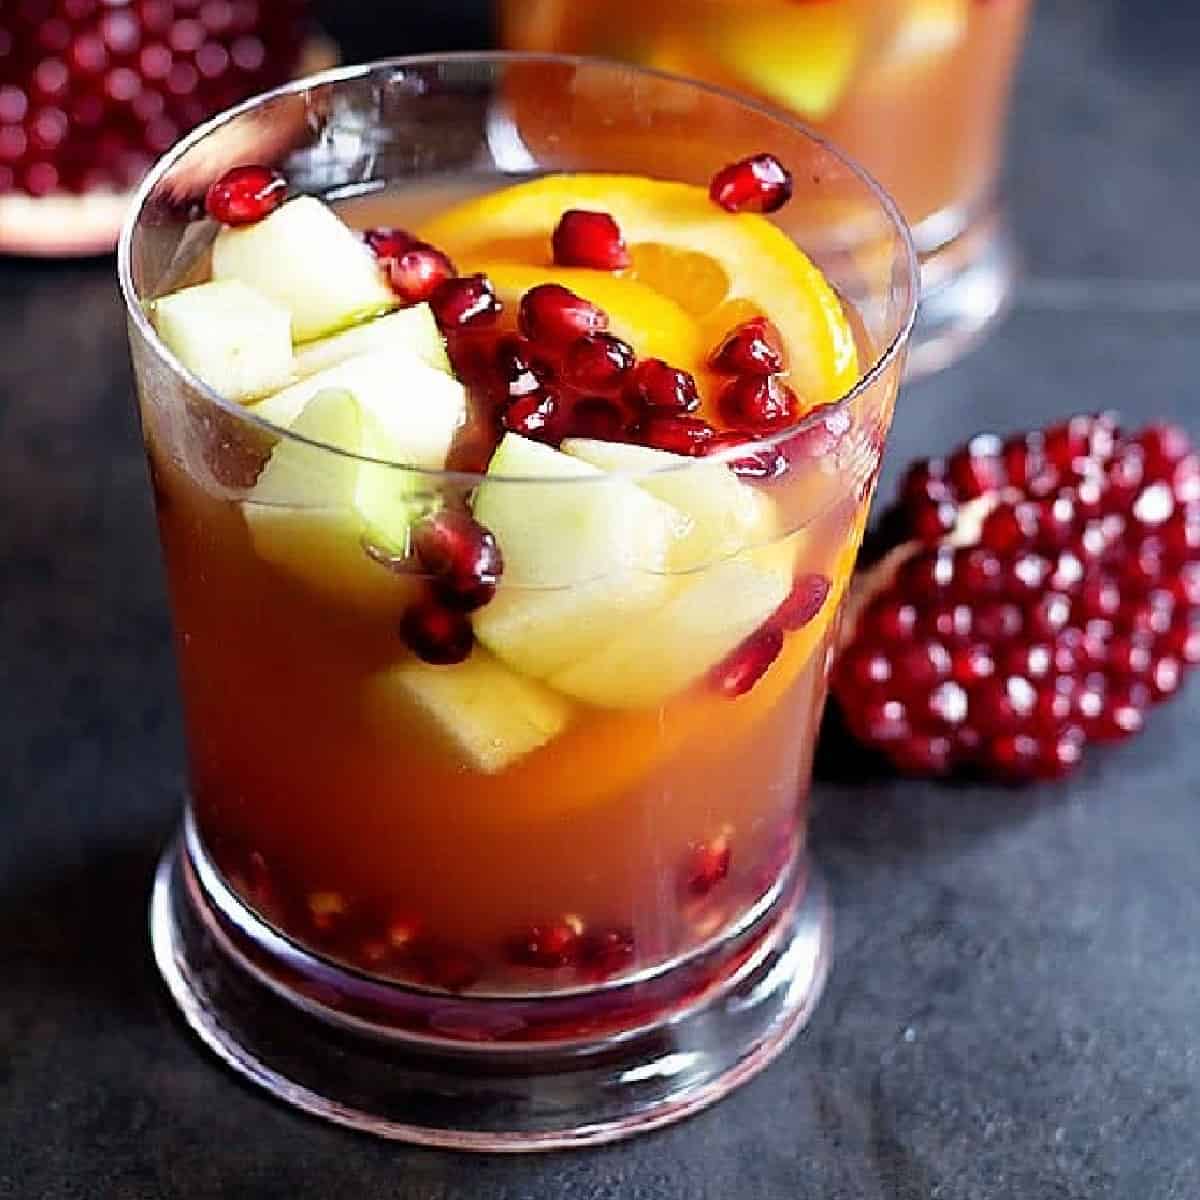 Bring joy and warmth to your cold days with this warm Mulled Cranberry Apple Cider. It takes just a few ingredients and 30 minutes to have this warm drink in your hands!
